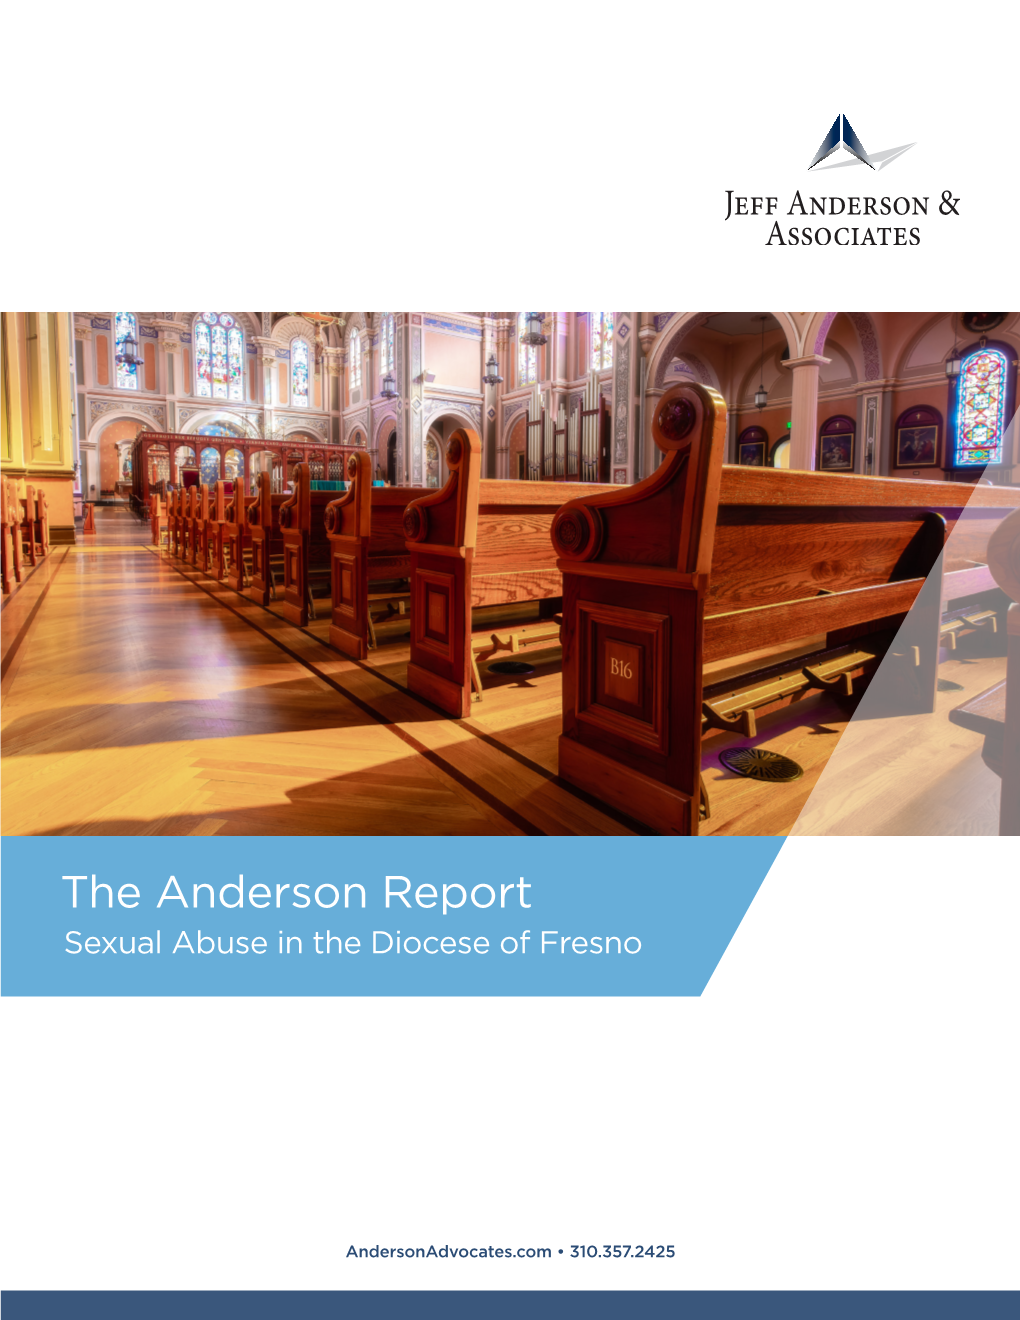 The Anderson Report: Sexual Abuse in The